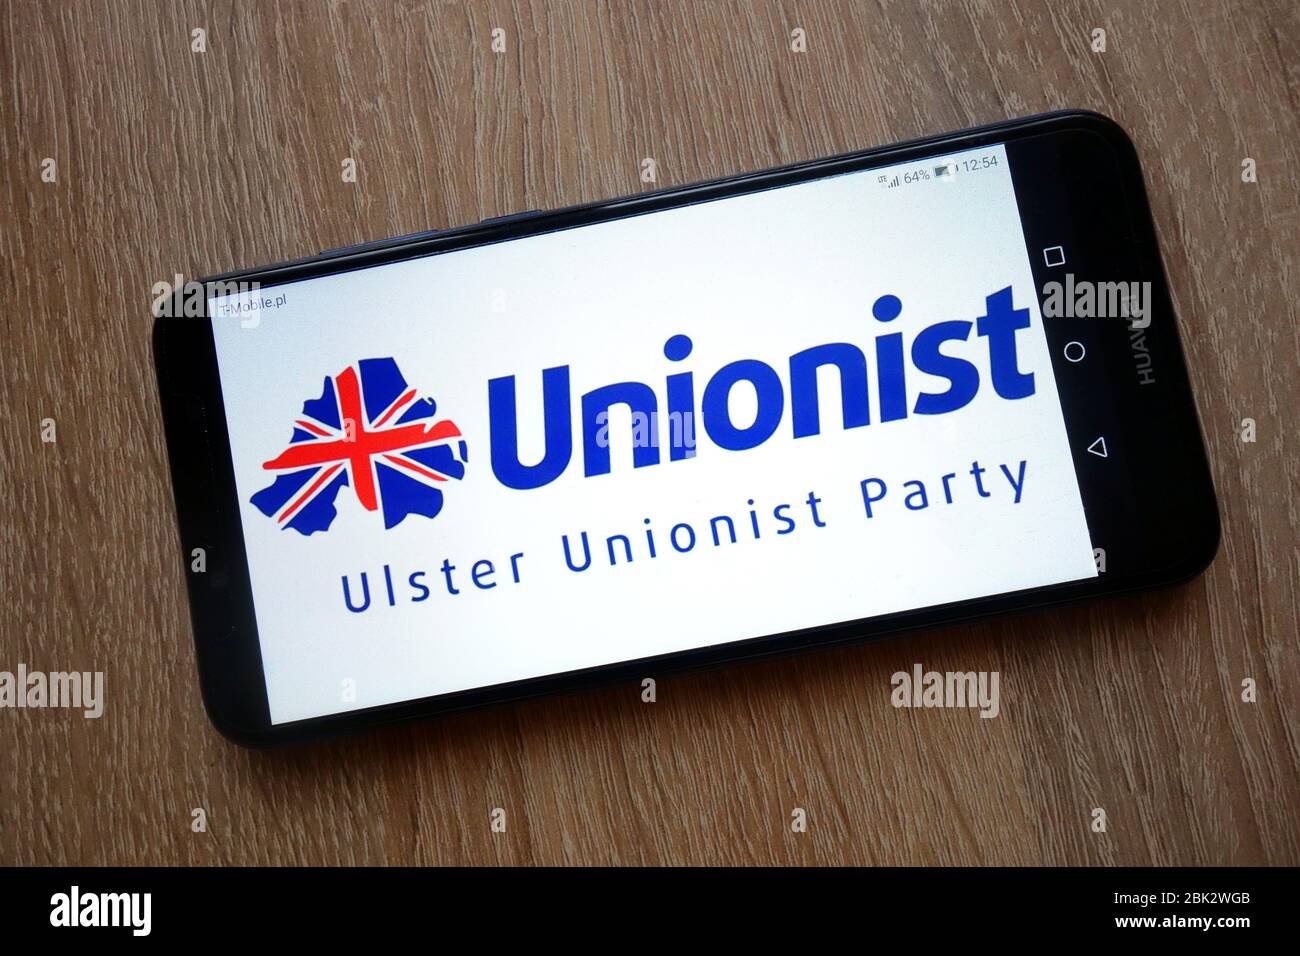 The Ulster Unionist Party (UUP) logo displayed on smartphone Stock Photo